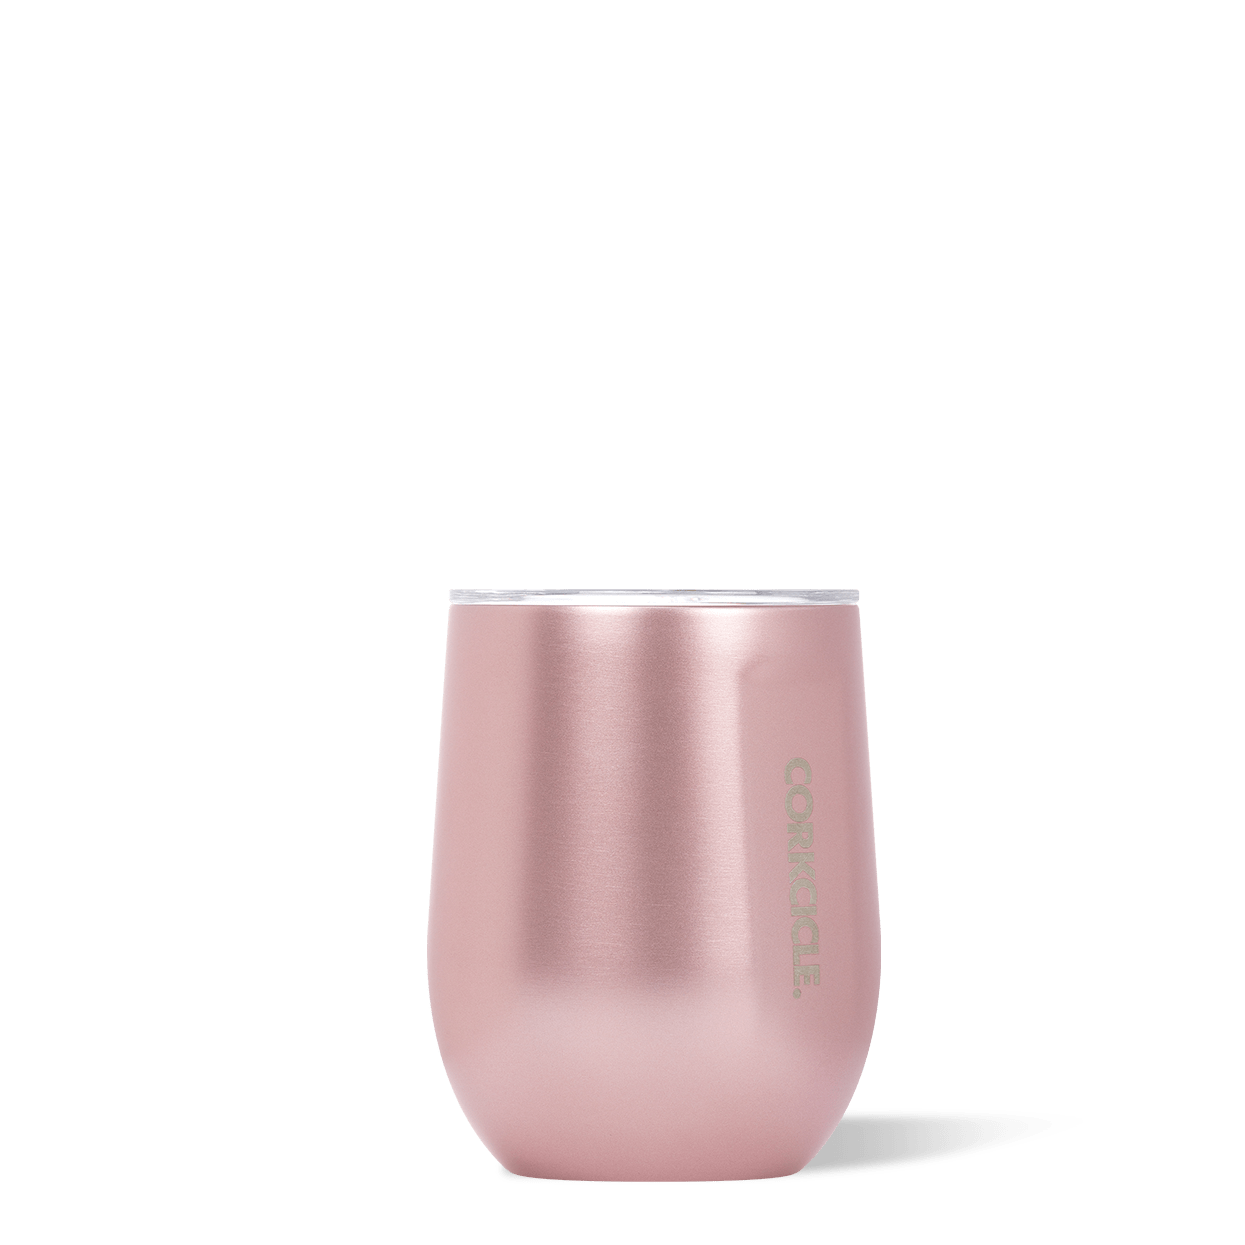 Corkcicle Prosecco Stainless Steel Stemless Wine Glass Cup, 12 oz. -  Insulated Tumblers - Hallmark